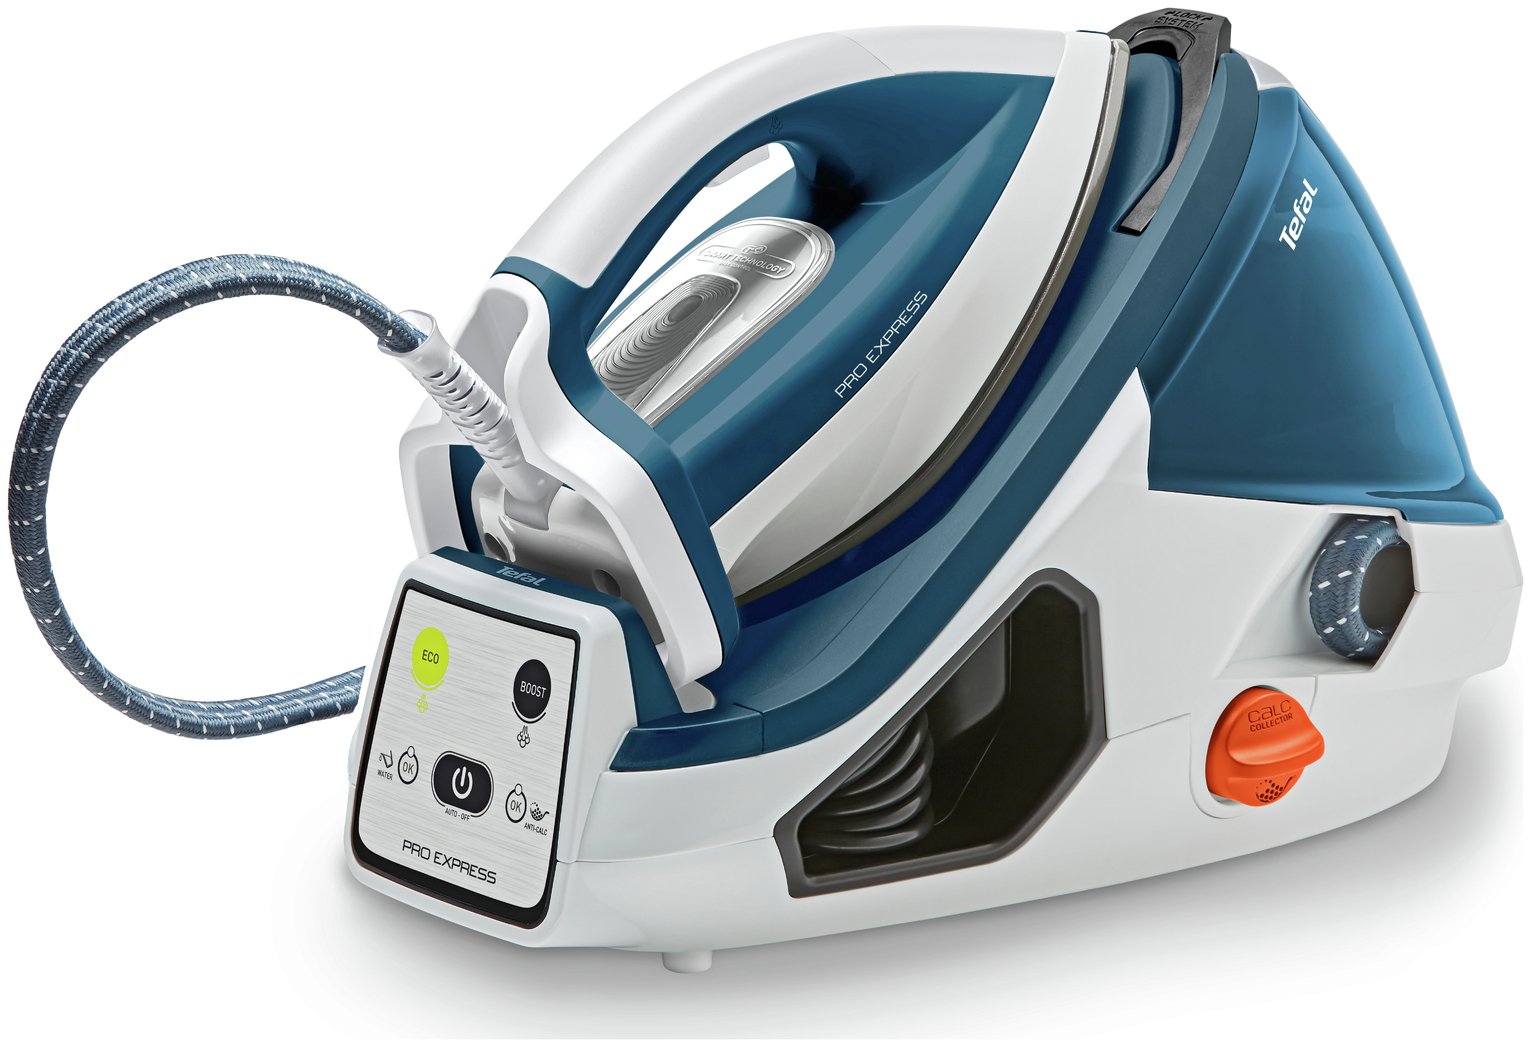 Tefal Pro Express Anti-scale GV7830 Steam Generator Iron Review